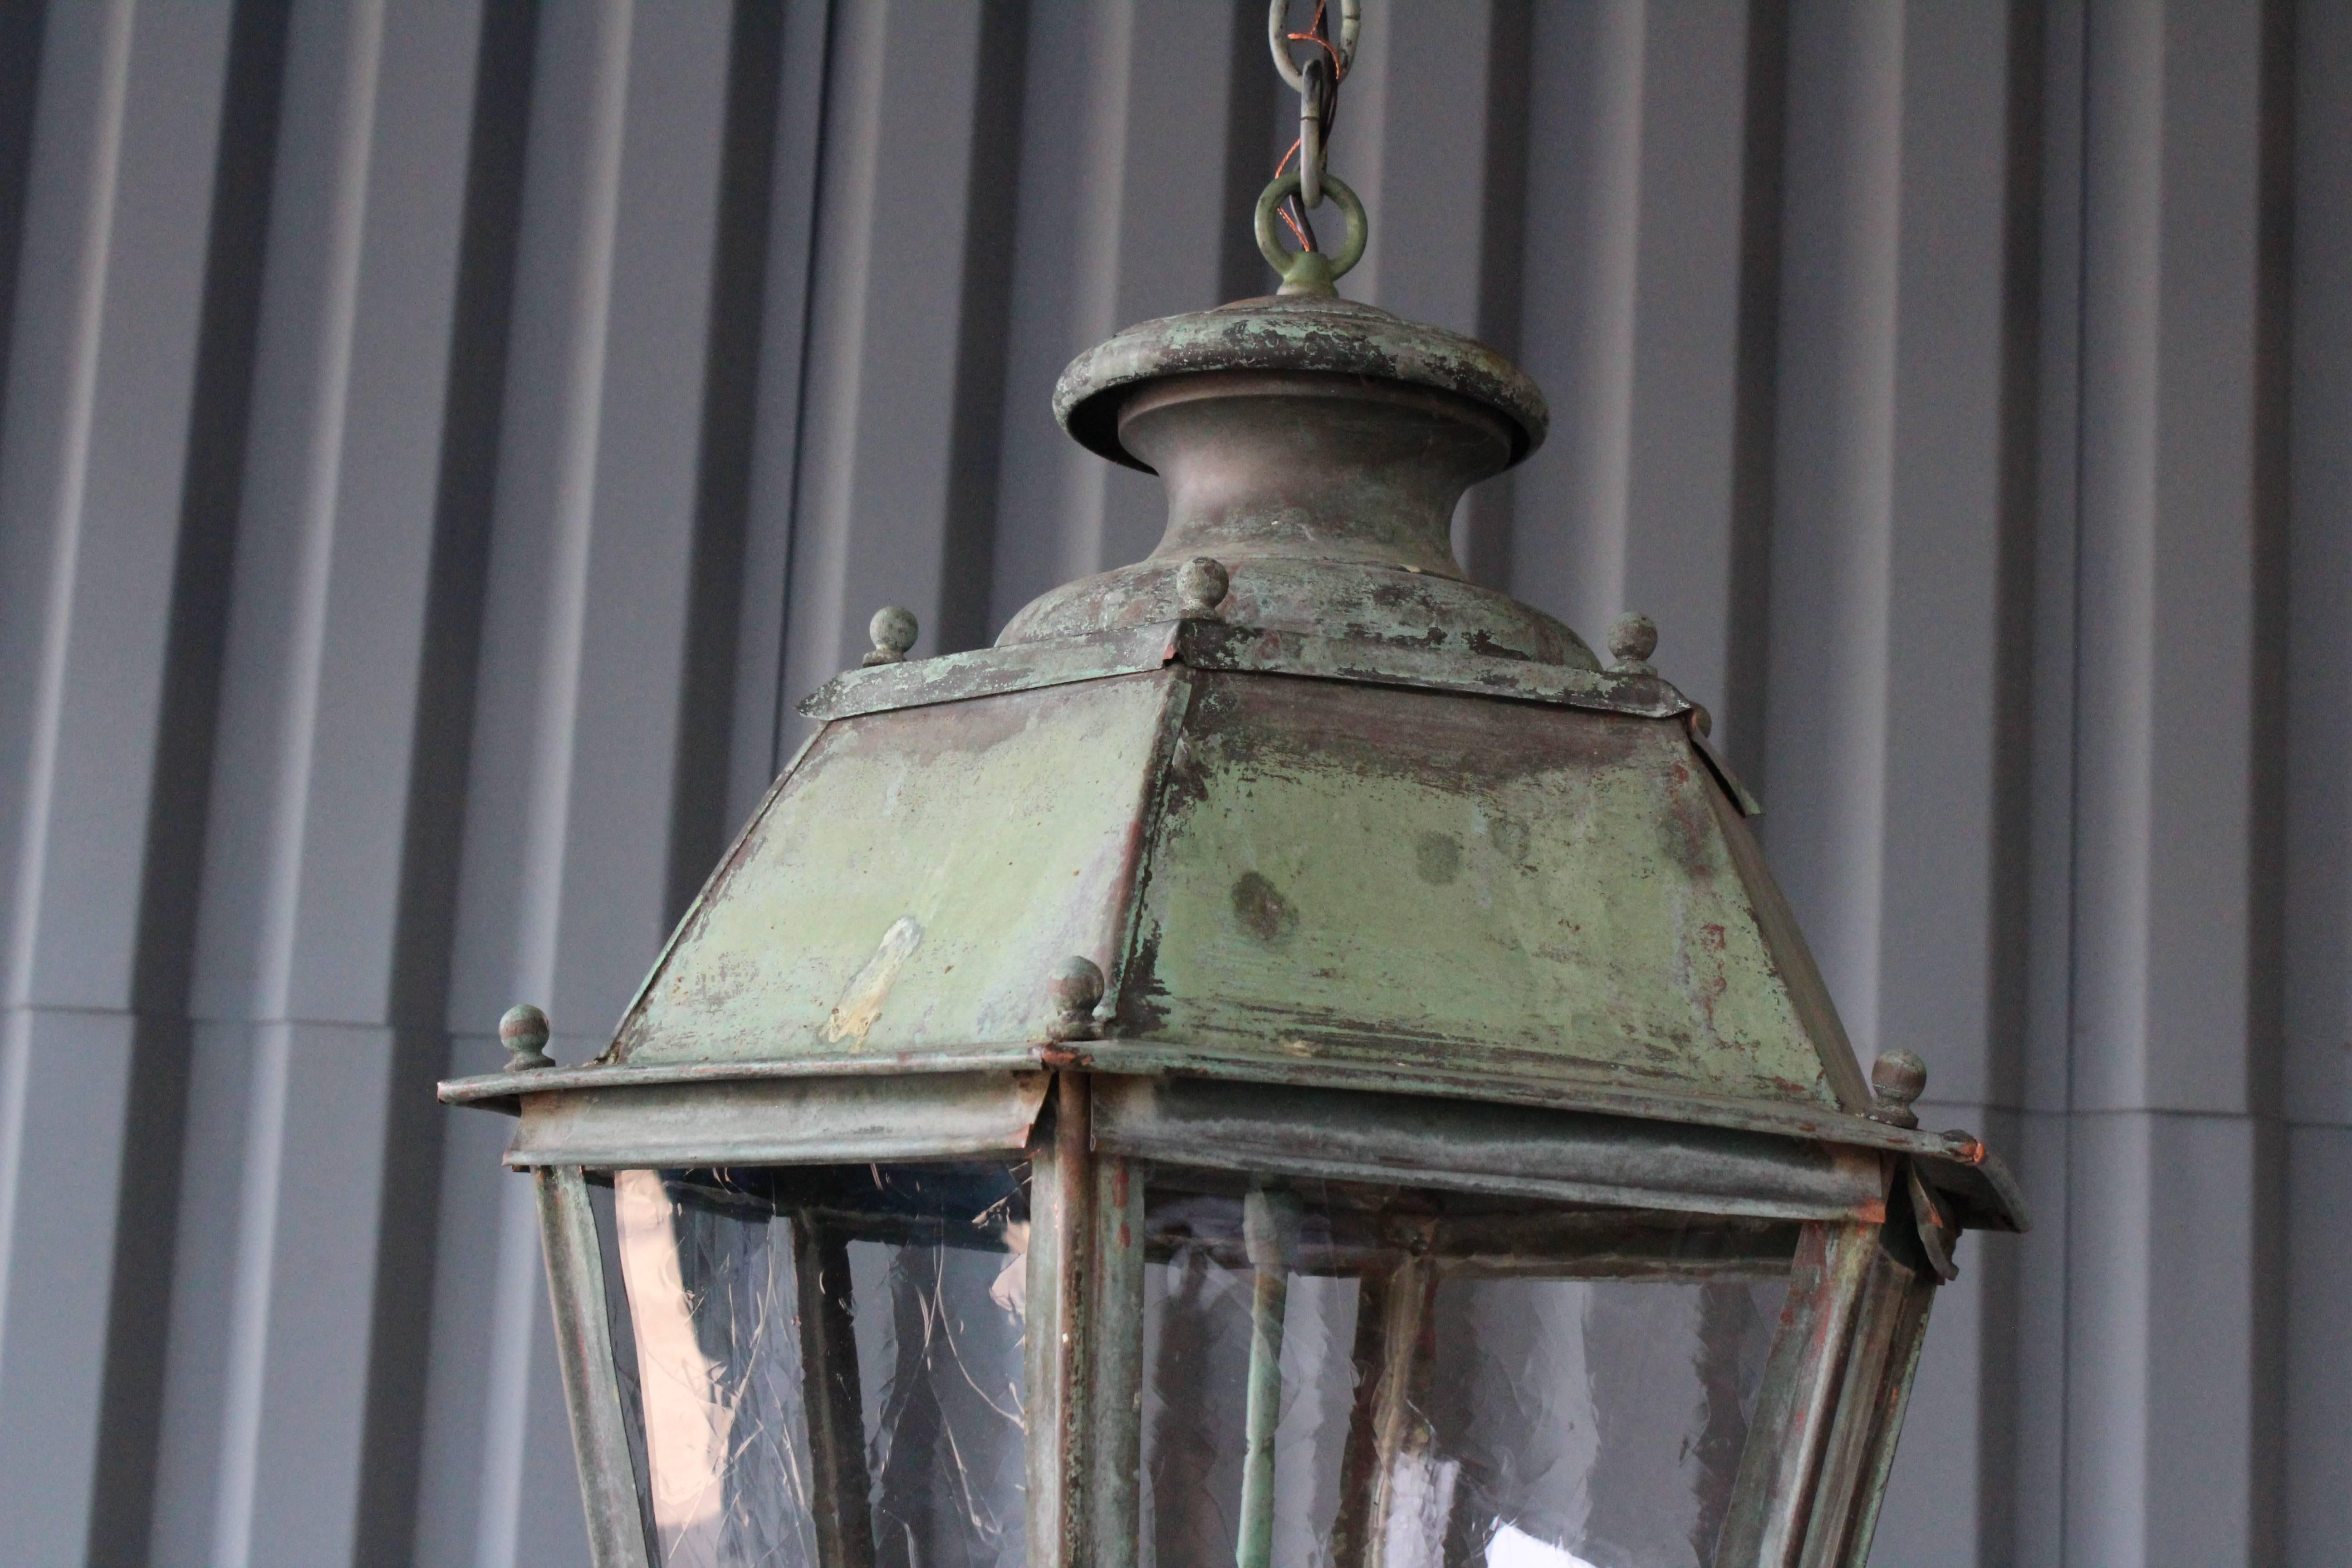 Antique hanging lantern with three lights in a beautifully aged copper patina. Features new glass panels and recently rewired with new wax candle covers.